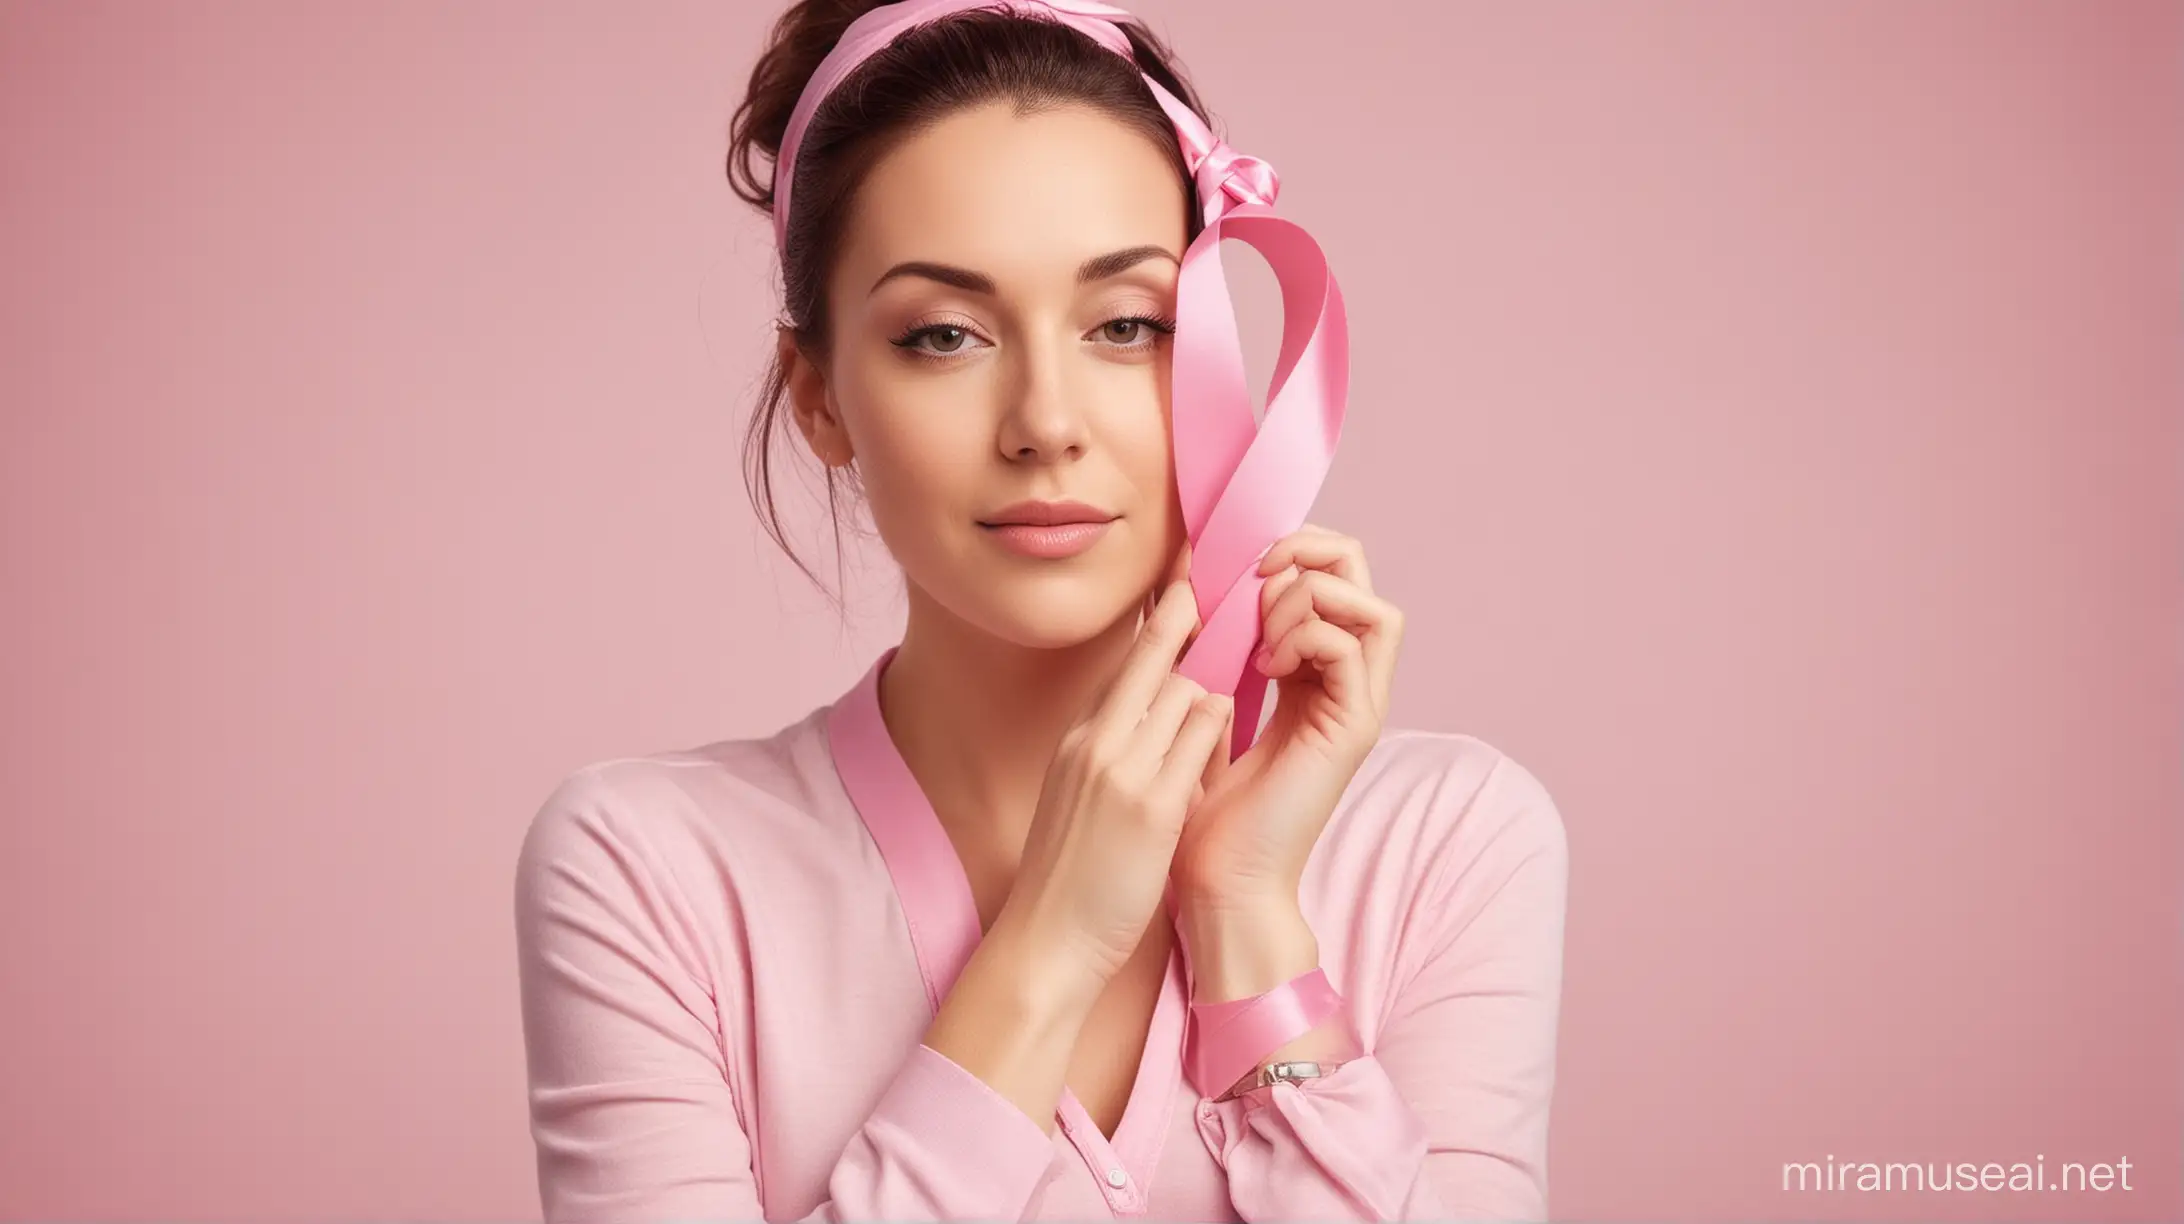 Create an image that symbolizes breast cancer awareness and support. Show a woman wearing a pink ribbon, the international symbol of breast cancer awareness, in a serene and contemplative pose. Include elements like a supportive environment, medical symbols, or peaceful surroundings to convey hope and solidarity in the fight against breast cancer